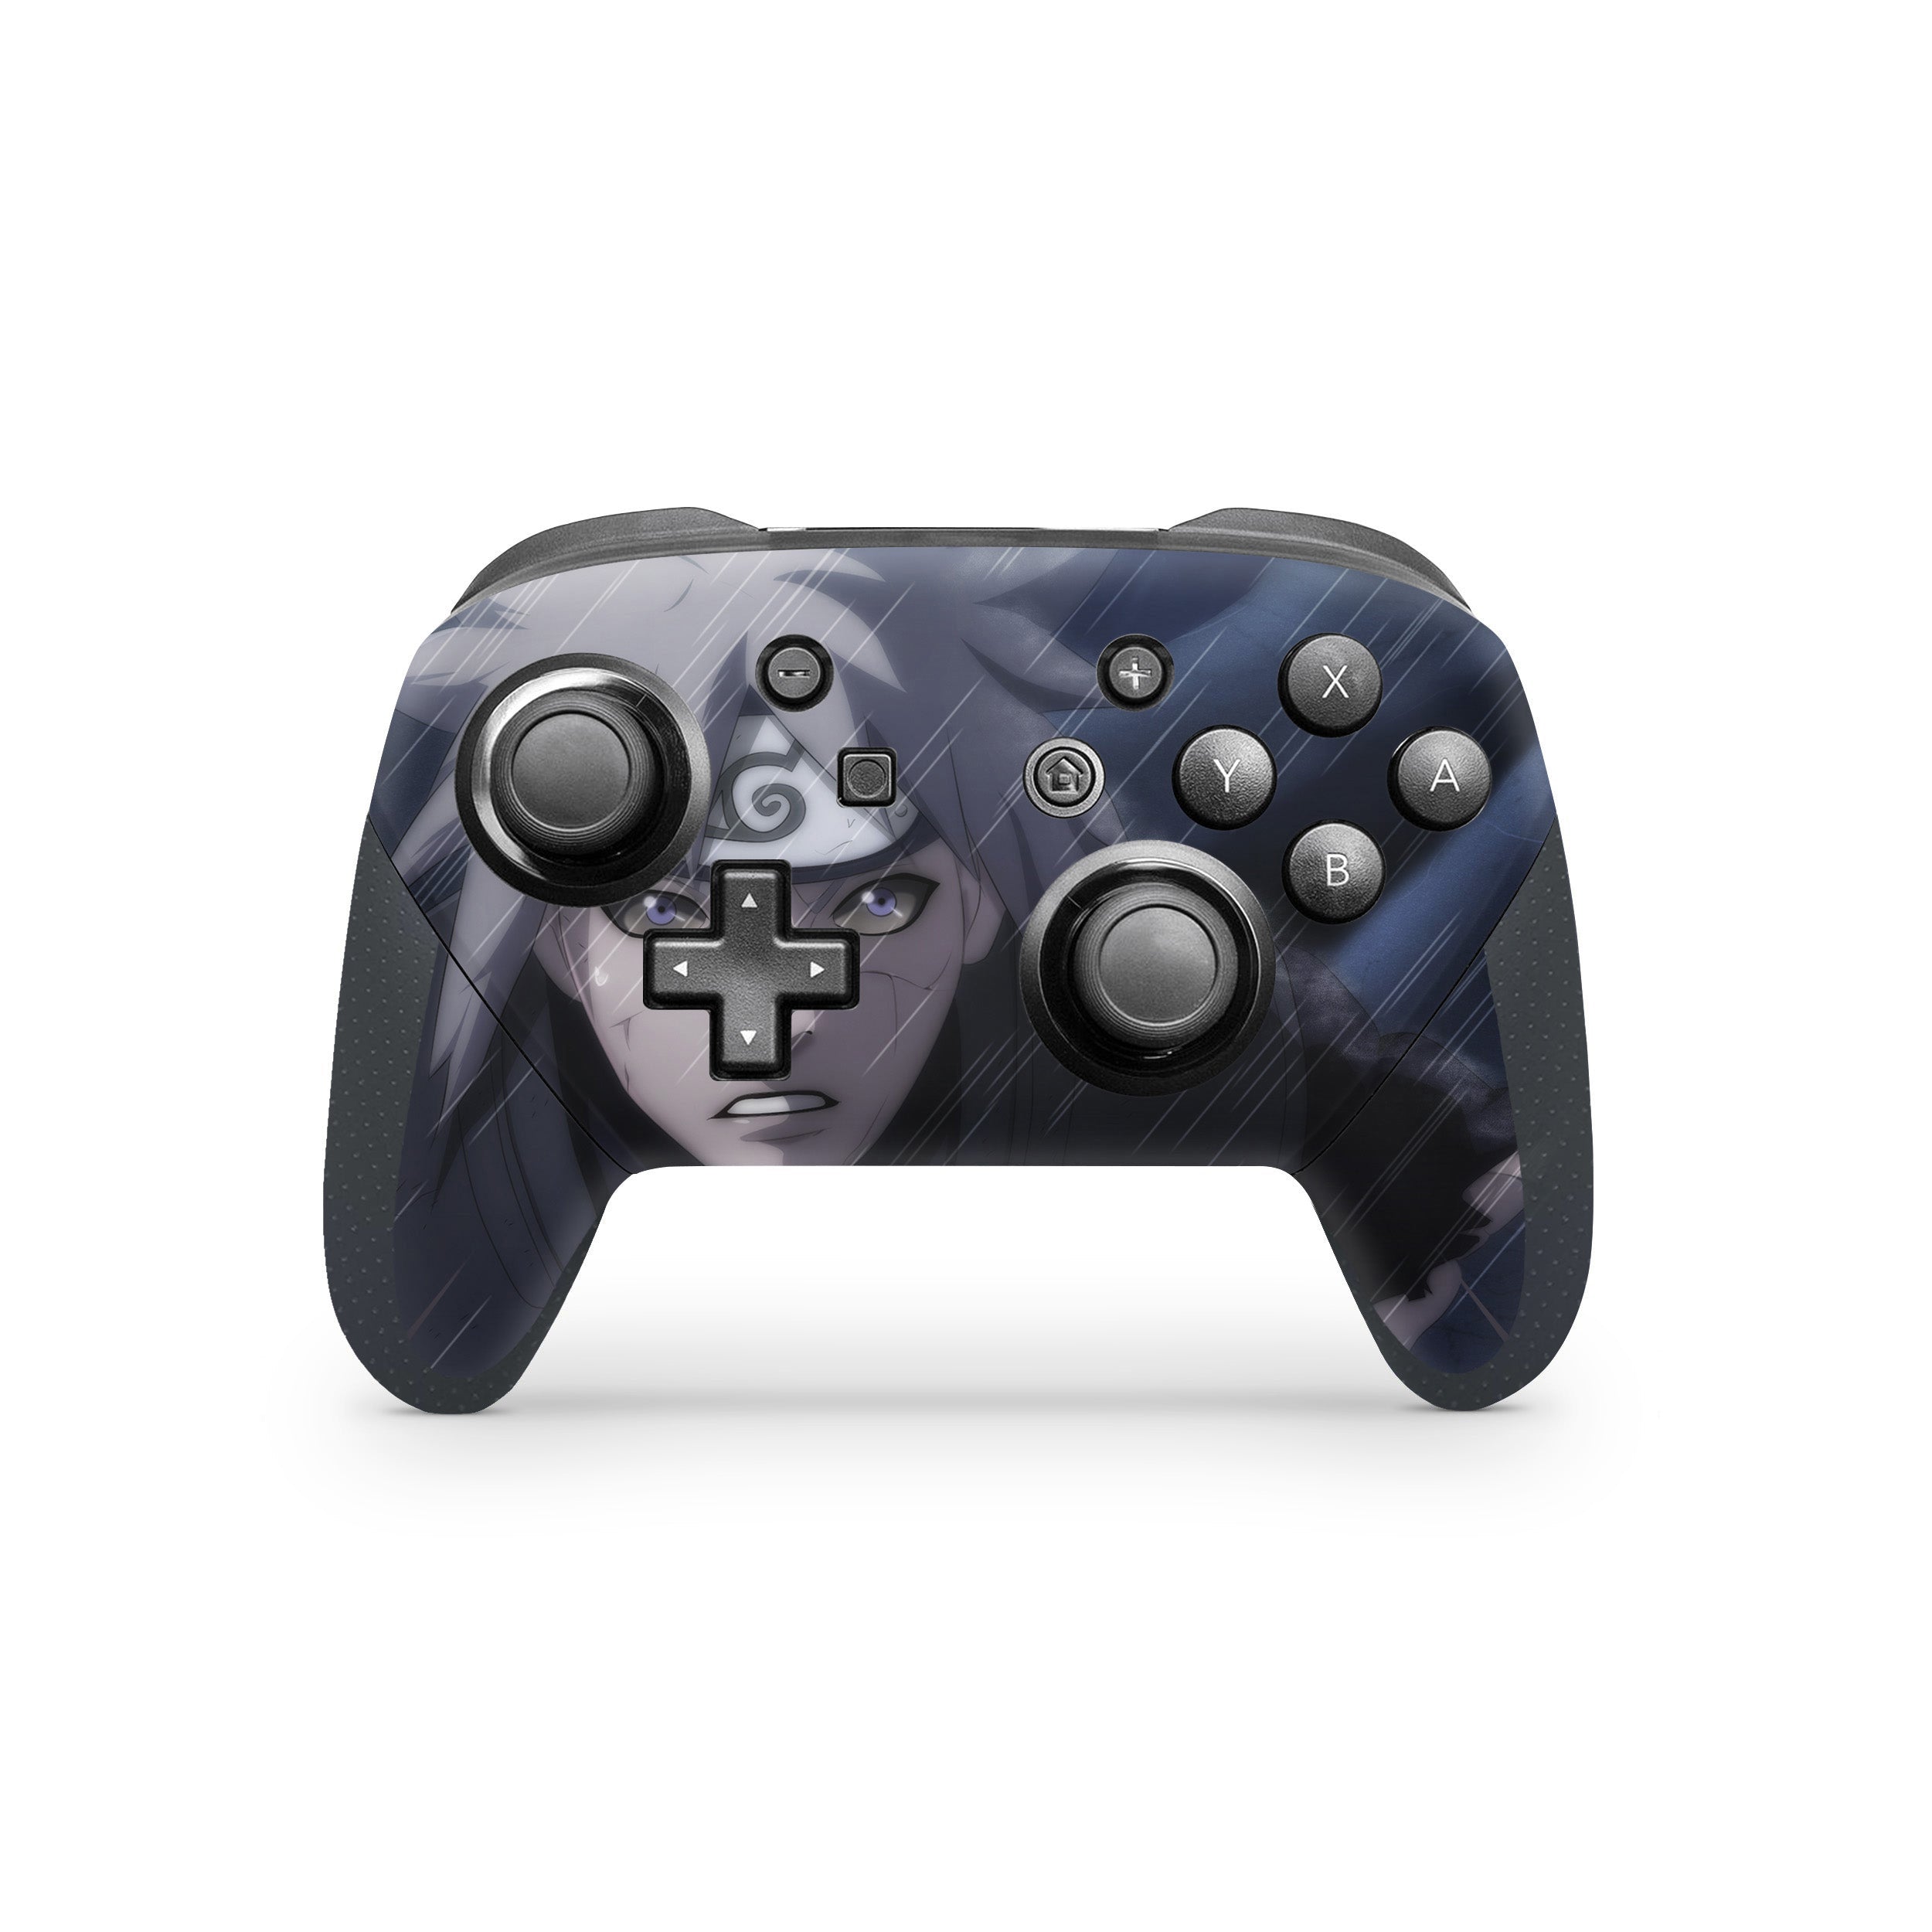 A video game skin featuring a Naruto Minato design for the Switch Pro Controller.